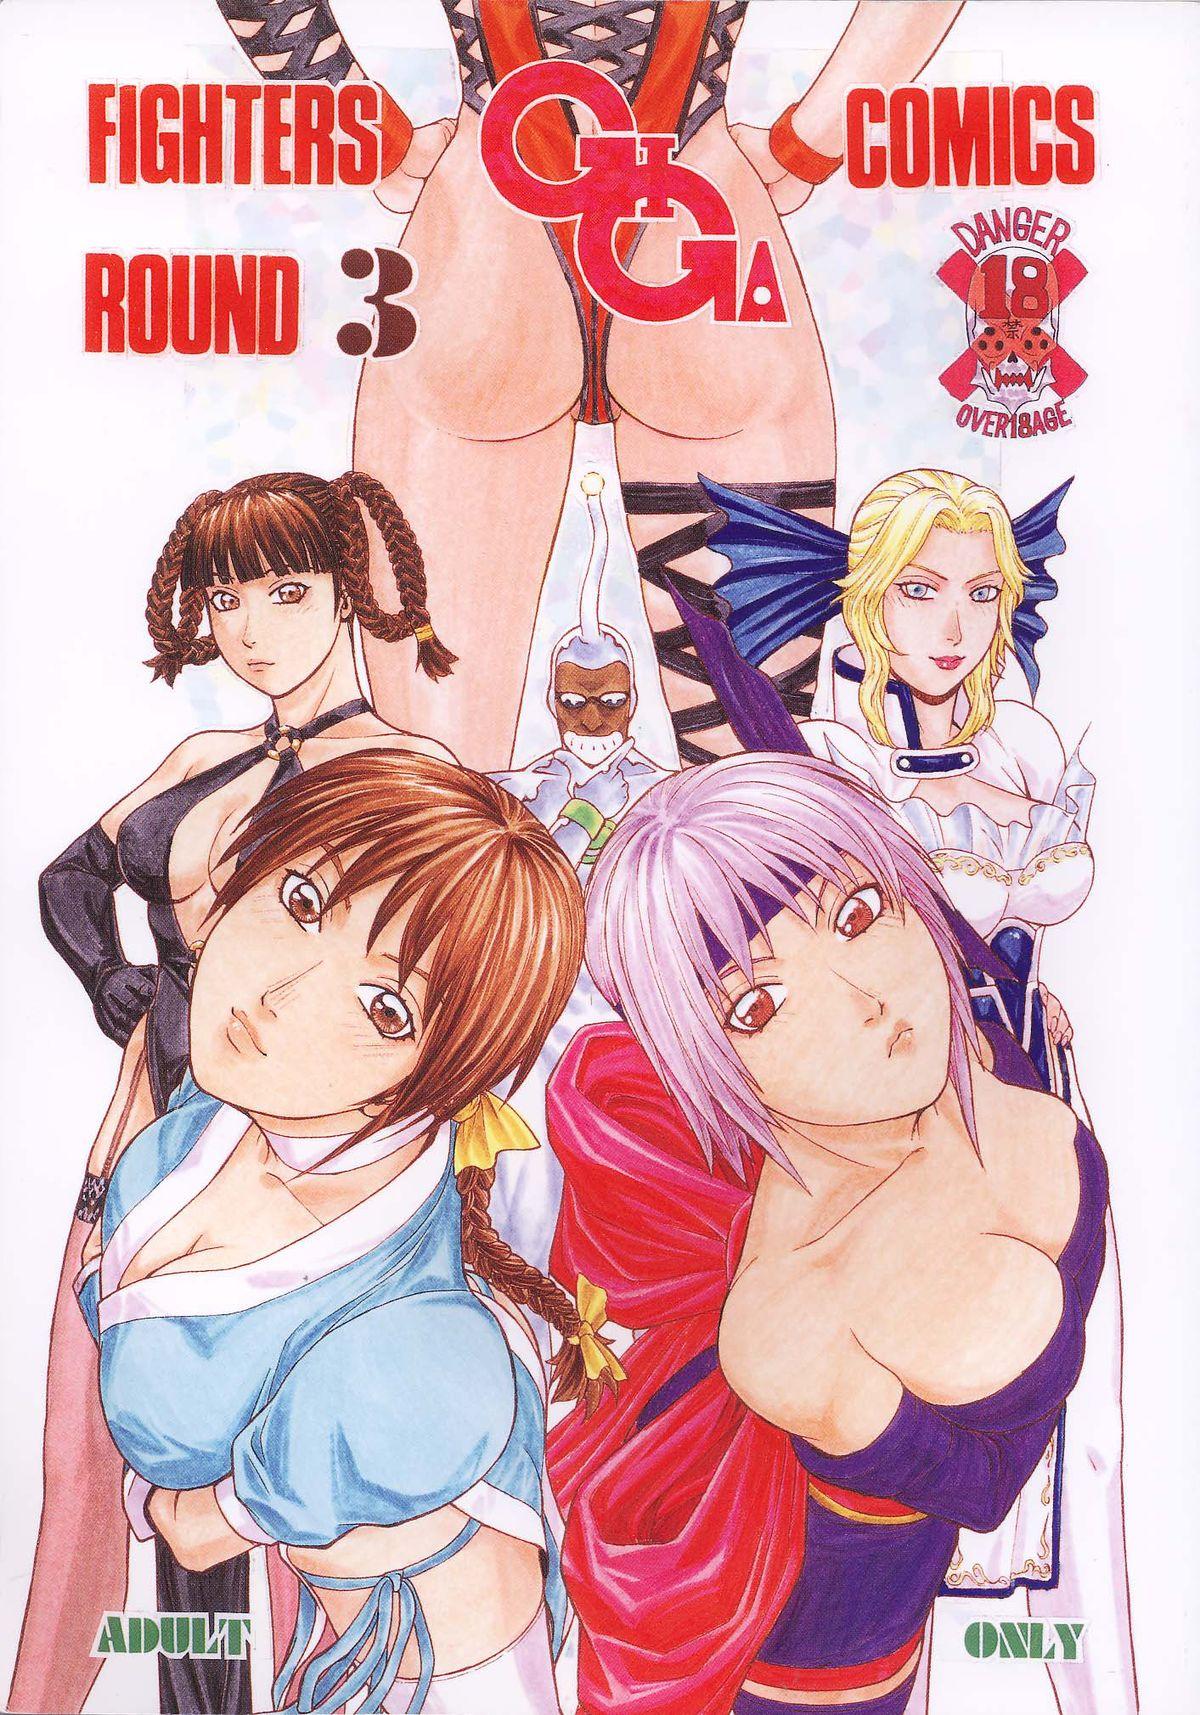 Monster Dick Fighters Giga Comics Round 3 - Street fighter Dead or alive Soulcalibur Roughsex - Picture 1